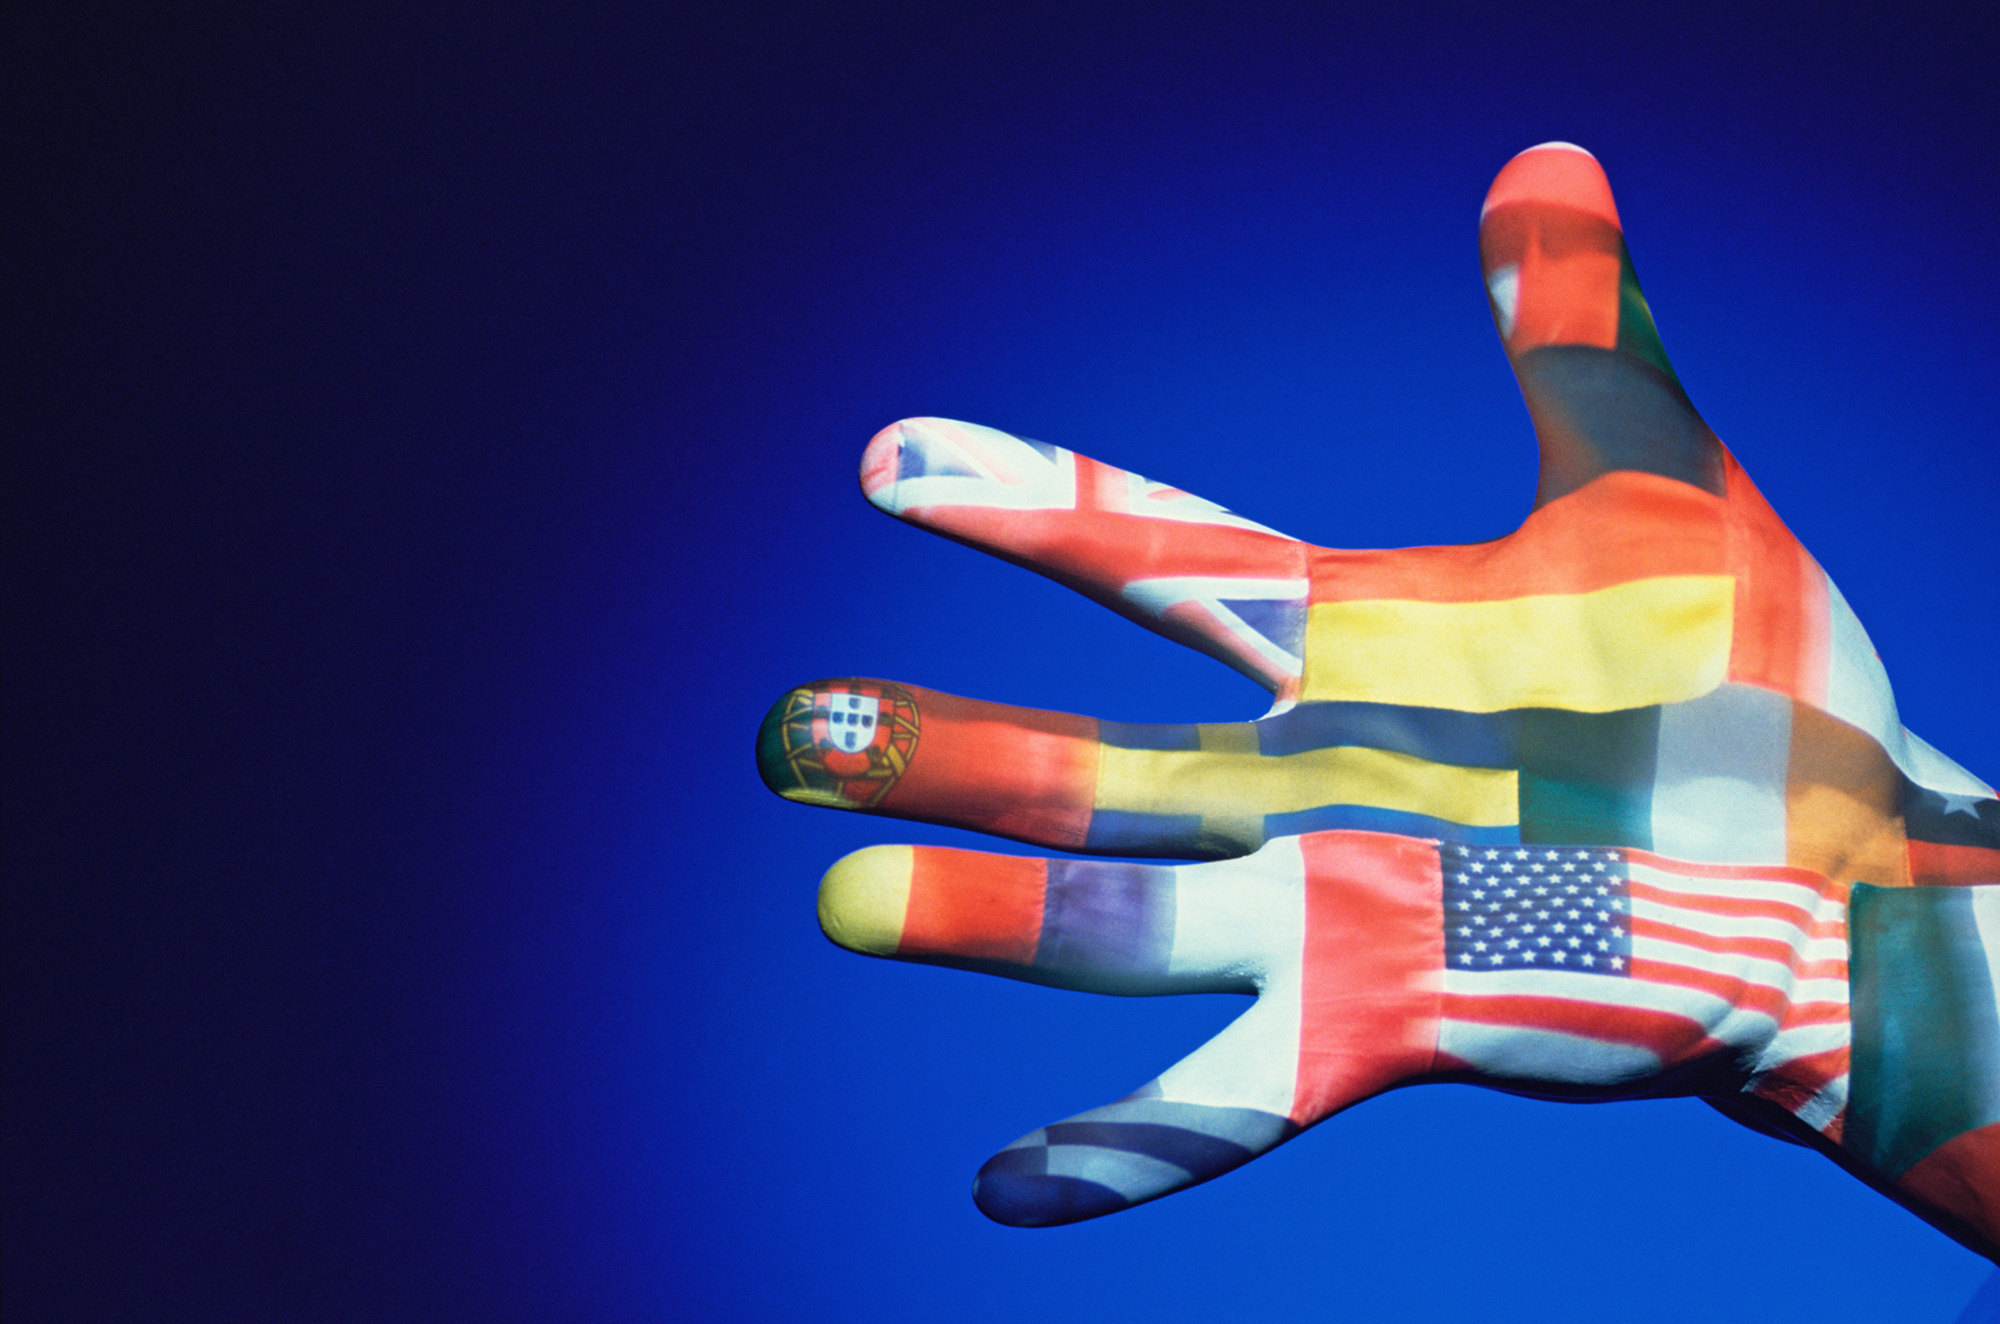 Human hand with various flags painted on it